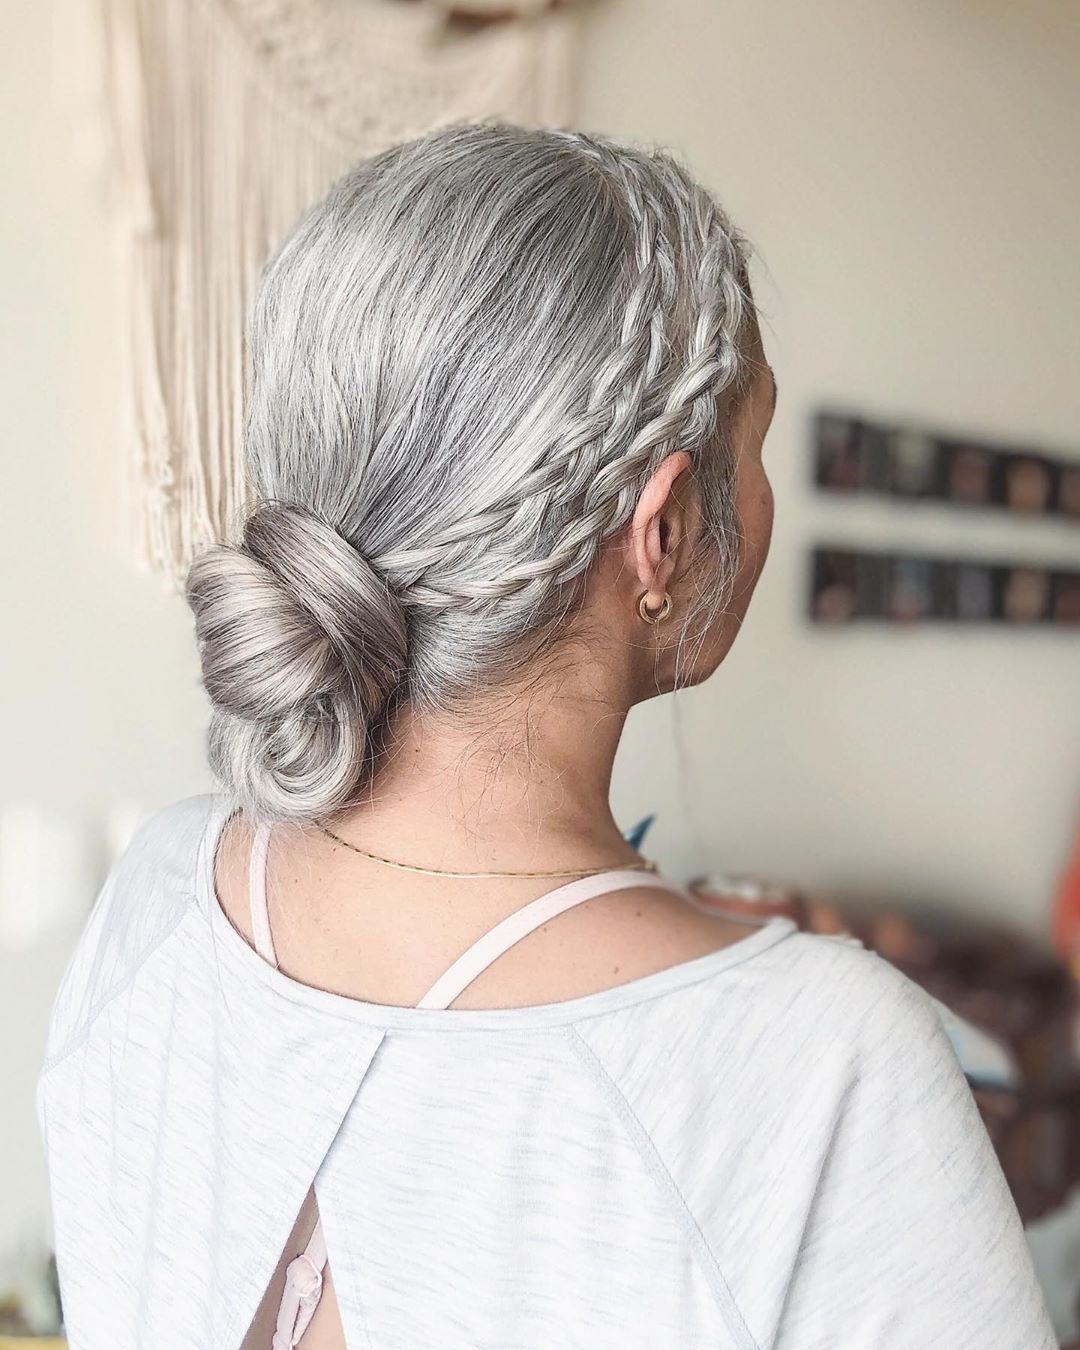 Top 10 Trendy Hairstyles Helps Your Grandma Look Chic and Younger |  KnowInsiders